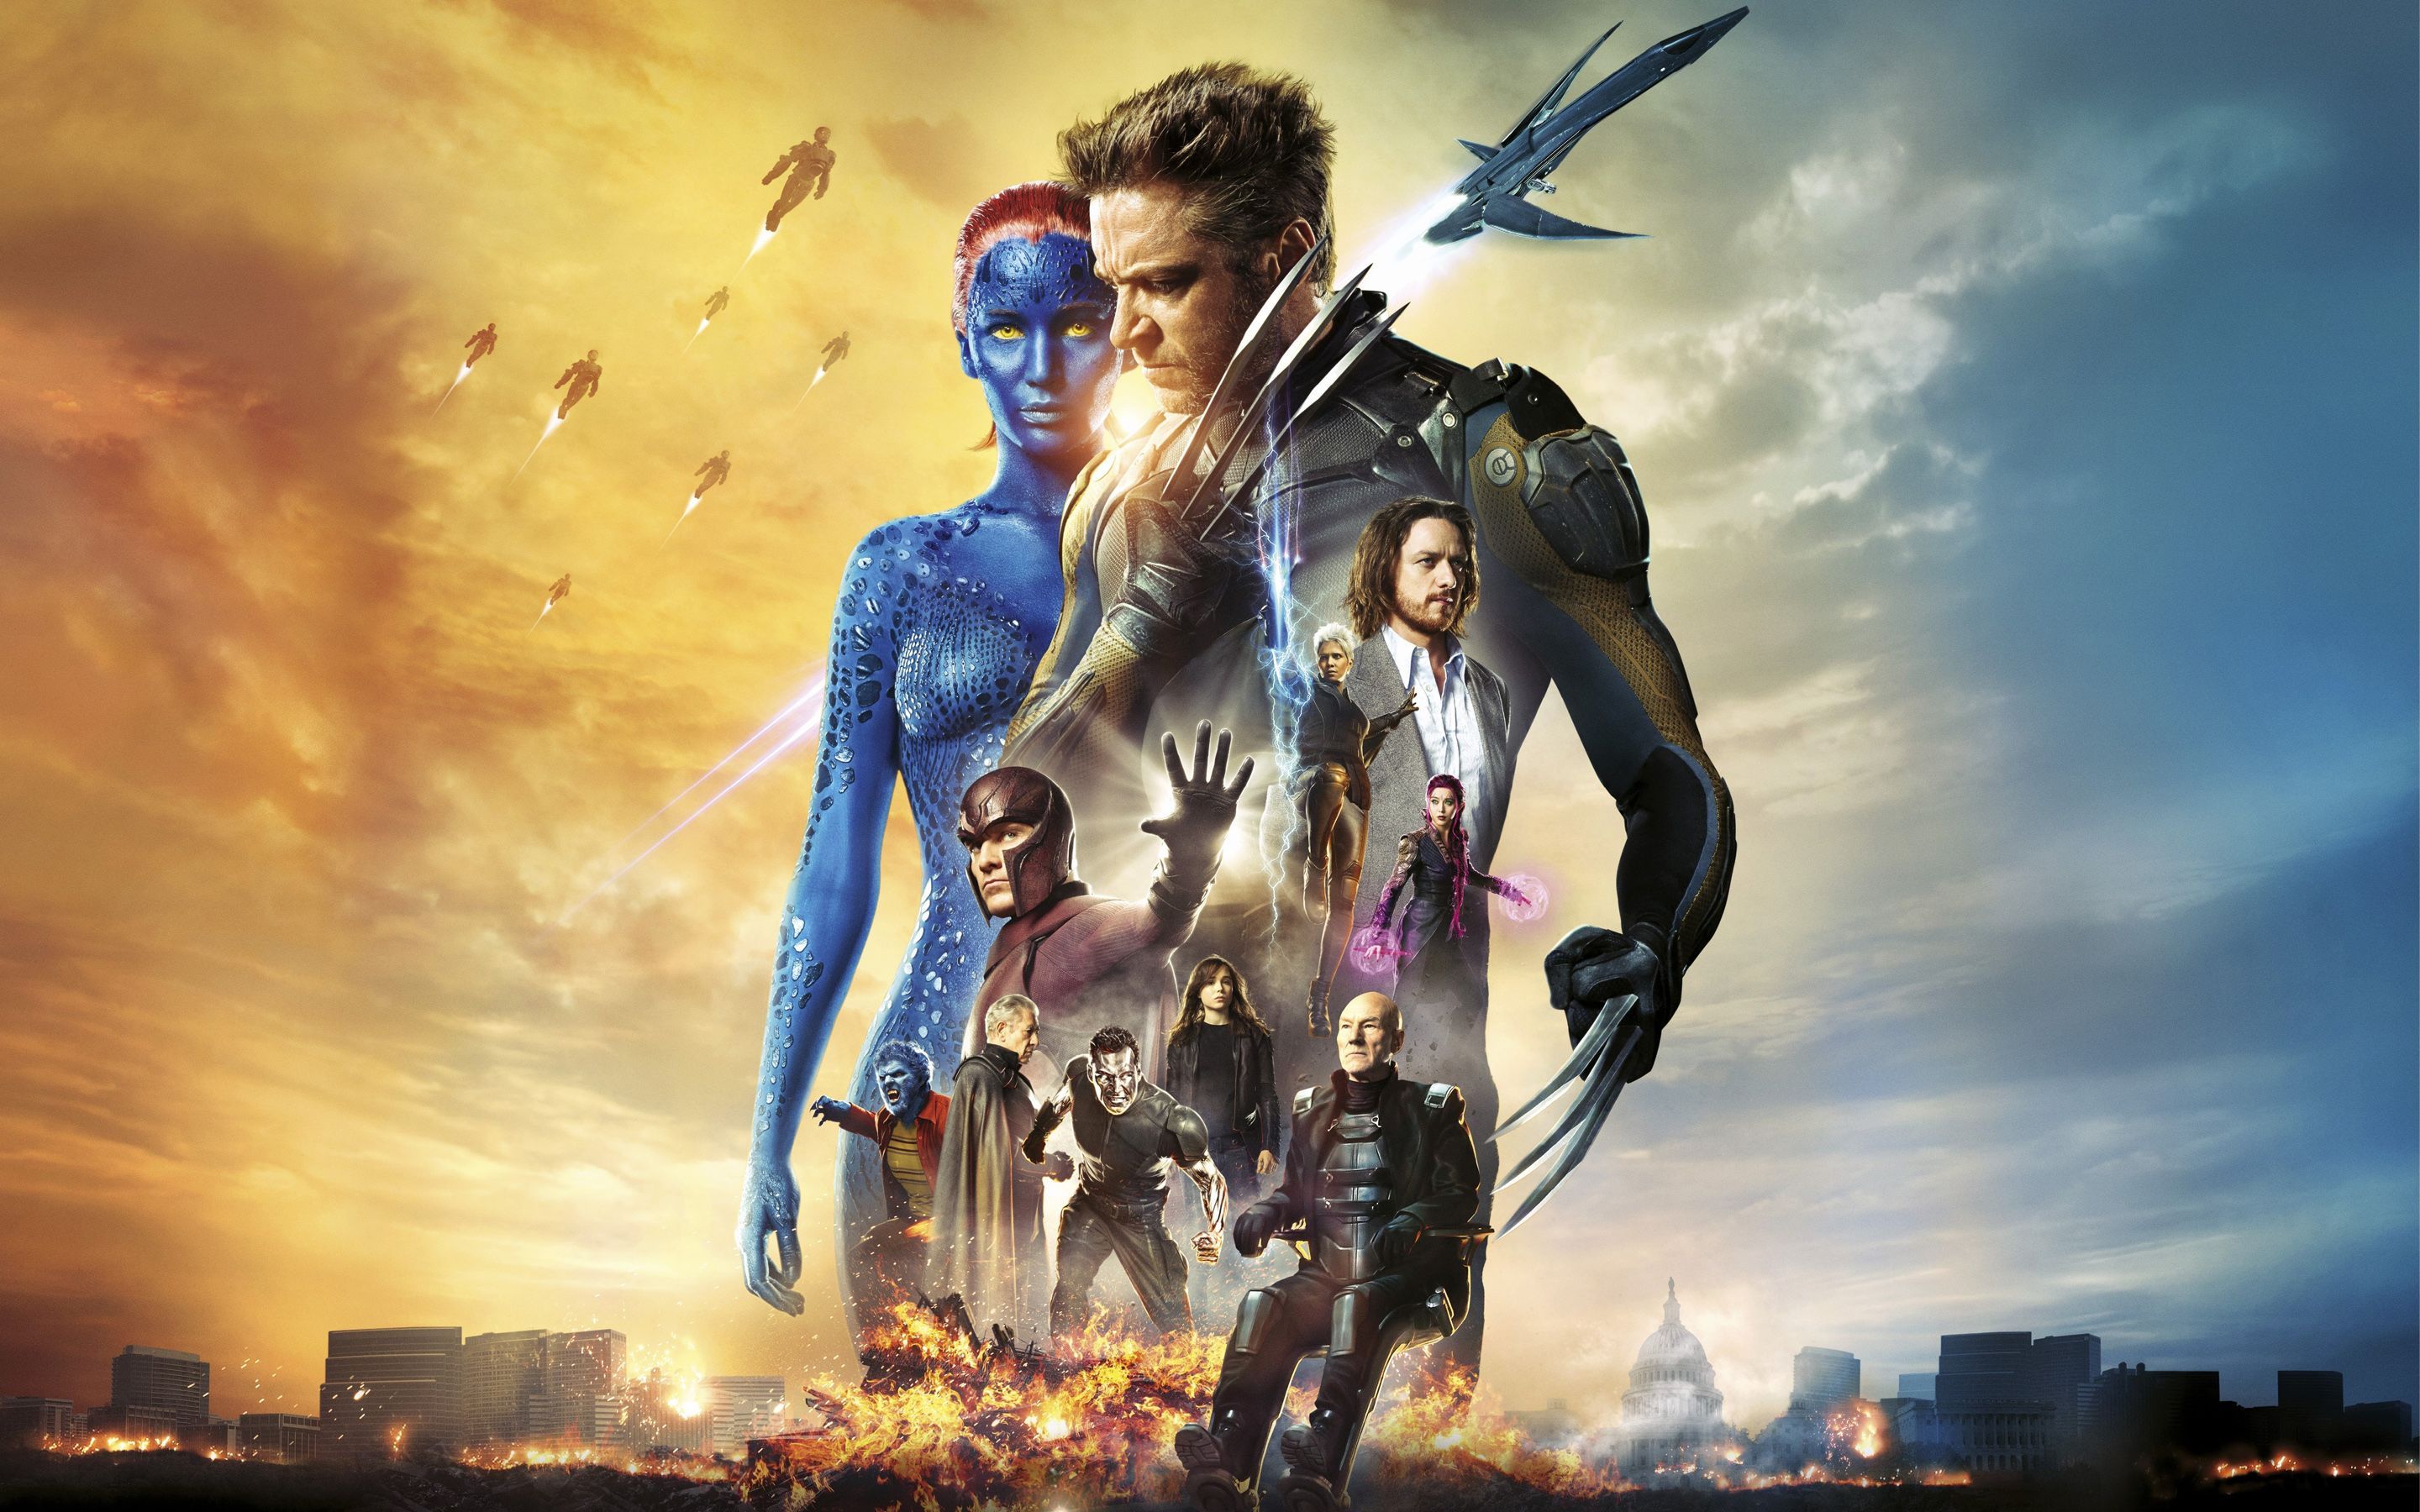 X Men Days of Future Past Movie Wallpapers | HD Wallpapers